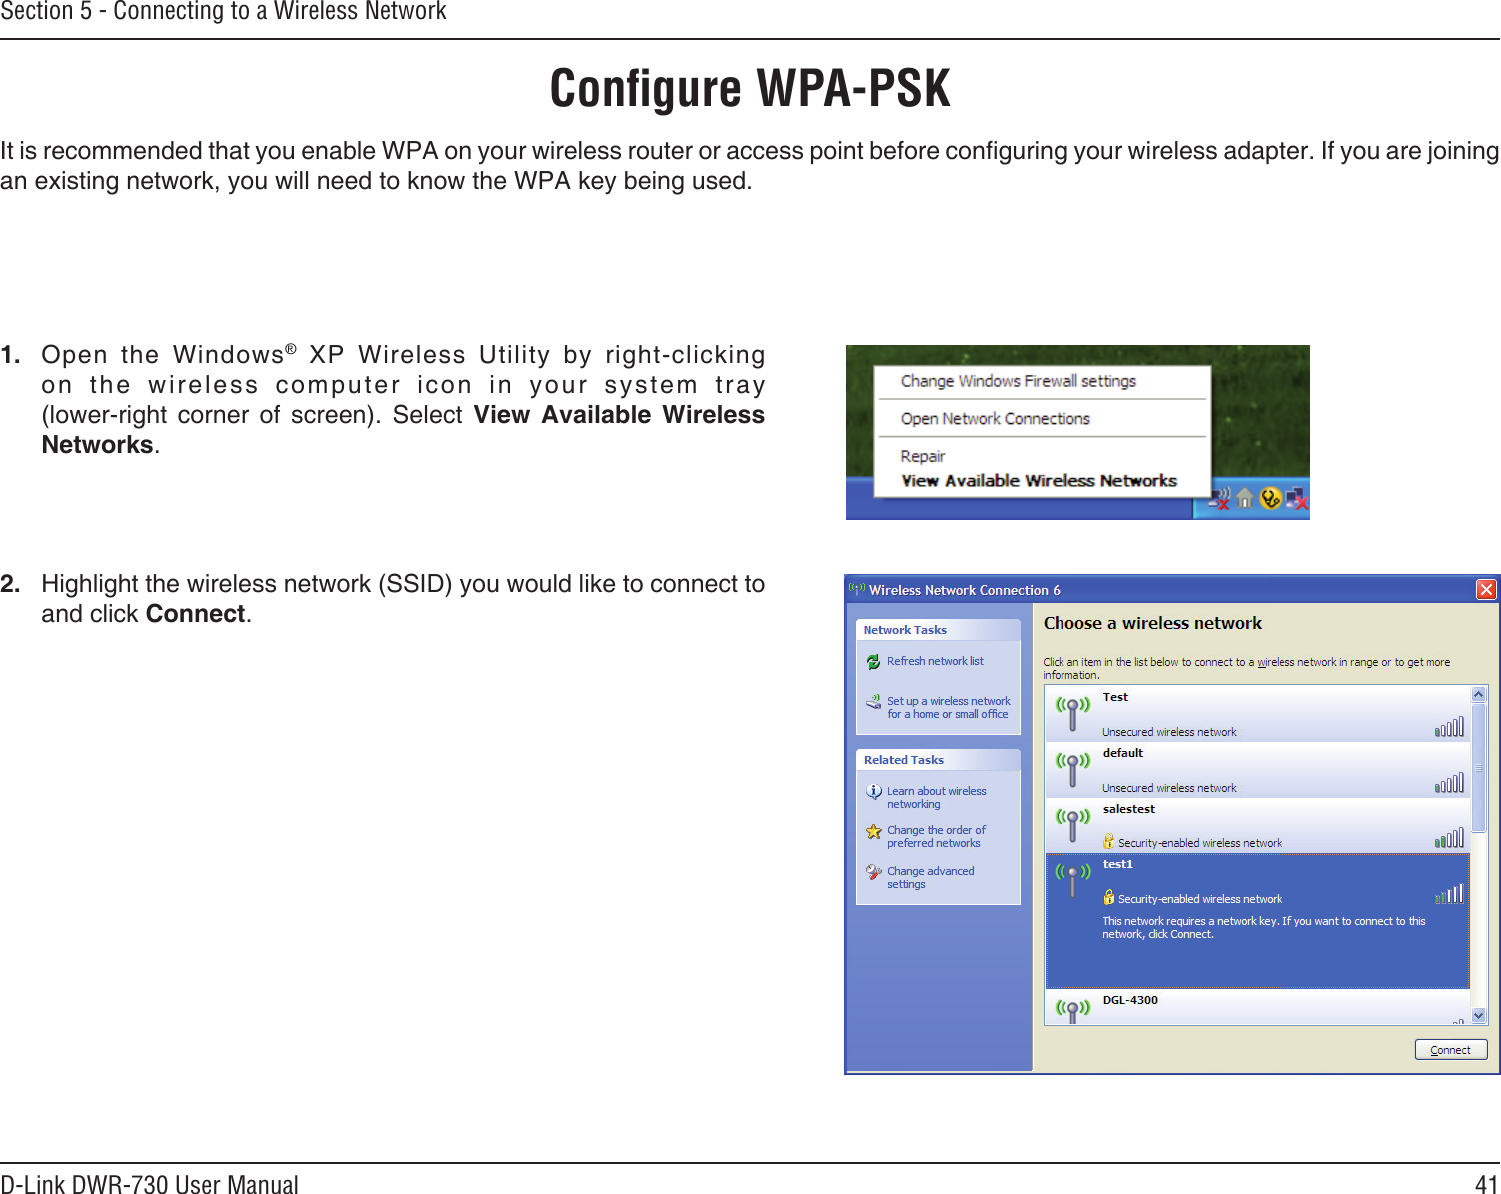 41D-Link DWR-730 User ManualSection 5 - Connecting to a Wireless NetworkConﬁgure WPA-PSK                                       